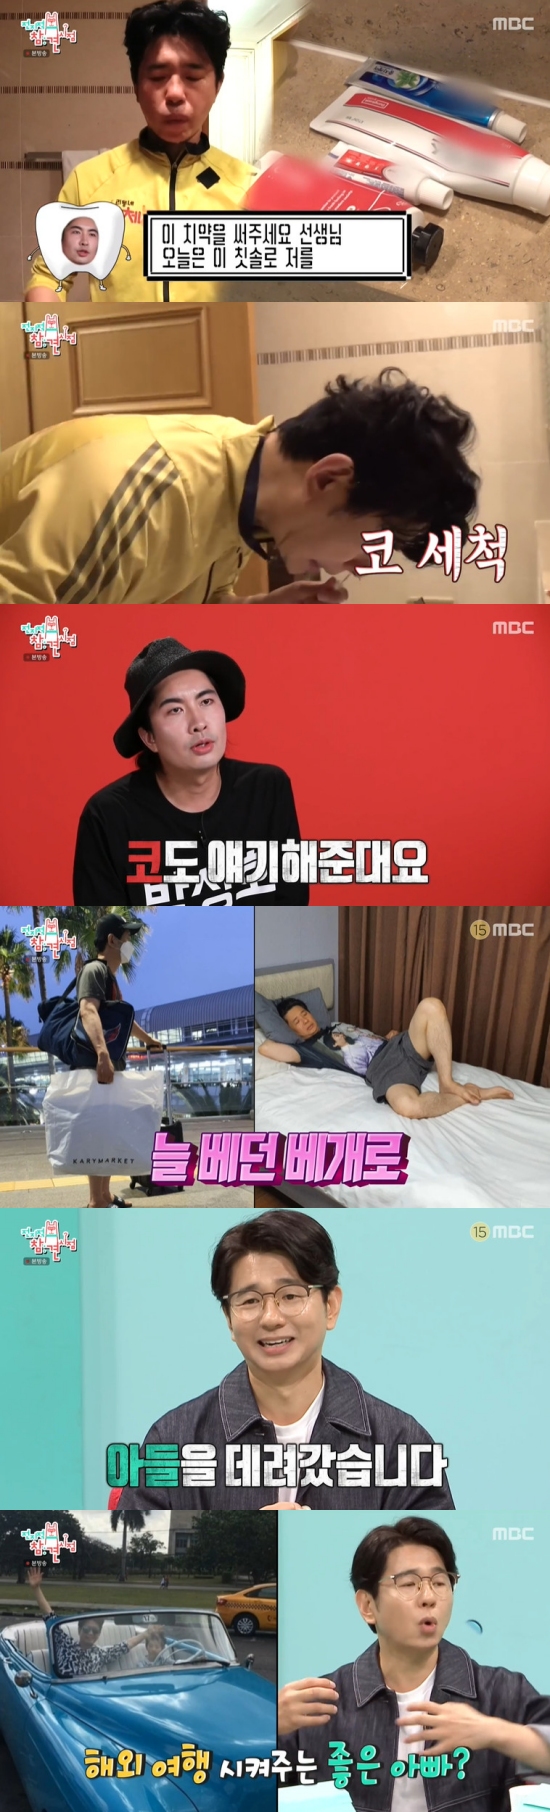 MBC Point of Omniscient Interfere broadcast on the 25th, Park Sung-ho and Lim Jae-baek released the daily life together.On this day, Lim Jae-baek appeared as Park Sung-ho Manager and said, Park Sung-ho Manager Lim Jae-baek. Song Eun-yi said, We are younger.The production team wondered, How did you work with Park Sung-ho? Lim Jae-baek said, The fact is that the gag concert was gone and it was very difficult.I did Seven Princess Driver when I was hard and hard. Yoo Se-yoon said, My juniors are saying that they meet a lot of seniors while they are Seven Princess Driver.Lim Jae-baek said, I was looking humble and I was in a state of being low because I did not have work.Dont you Seven Princess Driver, youre funny. Youve got to broadcast. You dont miss the strings. You keep talking. Come with me.Ill follow you like a shadow, he said.Park also chose one of several toothbrushes and toothpastes, and said he uses different toothbrushes and toothpaste every day. Lim Jae-baek said, Dia tells me.According to his condition and mood, toothpaste tells him that he is talking to him. He is more sensitive than he thought. Park washed his nose with salt water, and Lim Jae-baek said, Im telling you about his nose. Wash me today. Its all sensitive.When I go to the local shooting, I take a pillow for my home, he added.Park Sung-ho said, I have to wear my sleeping clothes for three days before traveling.I tried to take it with the showman performance, but the volume was so large that I took my son to worry about what to take and what to sleep as stable as at home. Furthermore, Lim Jae-baek reported, The comedian Park Sung-ho is very unfamiliar with you, unlike what you know. It is not easy to fix that part.After that, Park Sung-ho and Lim Jae-baek said, Kiss. Lim Jae-baek said, I have a lot of broadcasting and a lot of radio.In particular, Lim Jae-baek was active and outgoing, and contacted PDs who had a friendship such as Korean Music Hanmadang and Endless Masterpiece for Park Sung-ho, who recently released a folk song album.Park Sung-ho praised Lim Jae-baeks network, saying that things often happen.Park Sung-ho and Lim Jae-baek went to shoot a donut advertisement, and Lim Jae-baek said, When you come in, you can go to your brother if you go.I will try to do it with me even if I cut the fee. Lim Jae-baek danced together and applauded Park Sung-hos personal shooting time, creating a cheerful atmosphere.Photo = MBC Broadcasting Screen